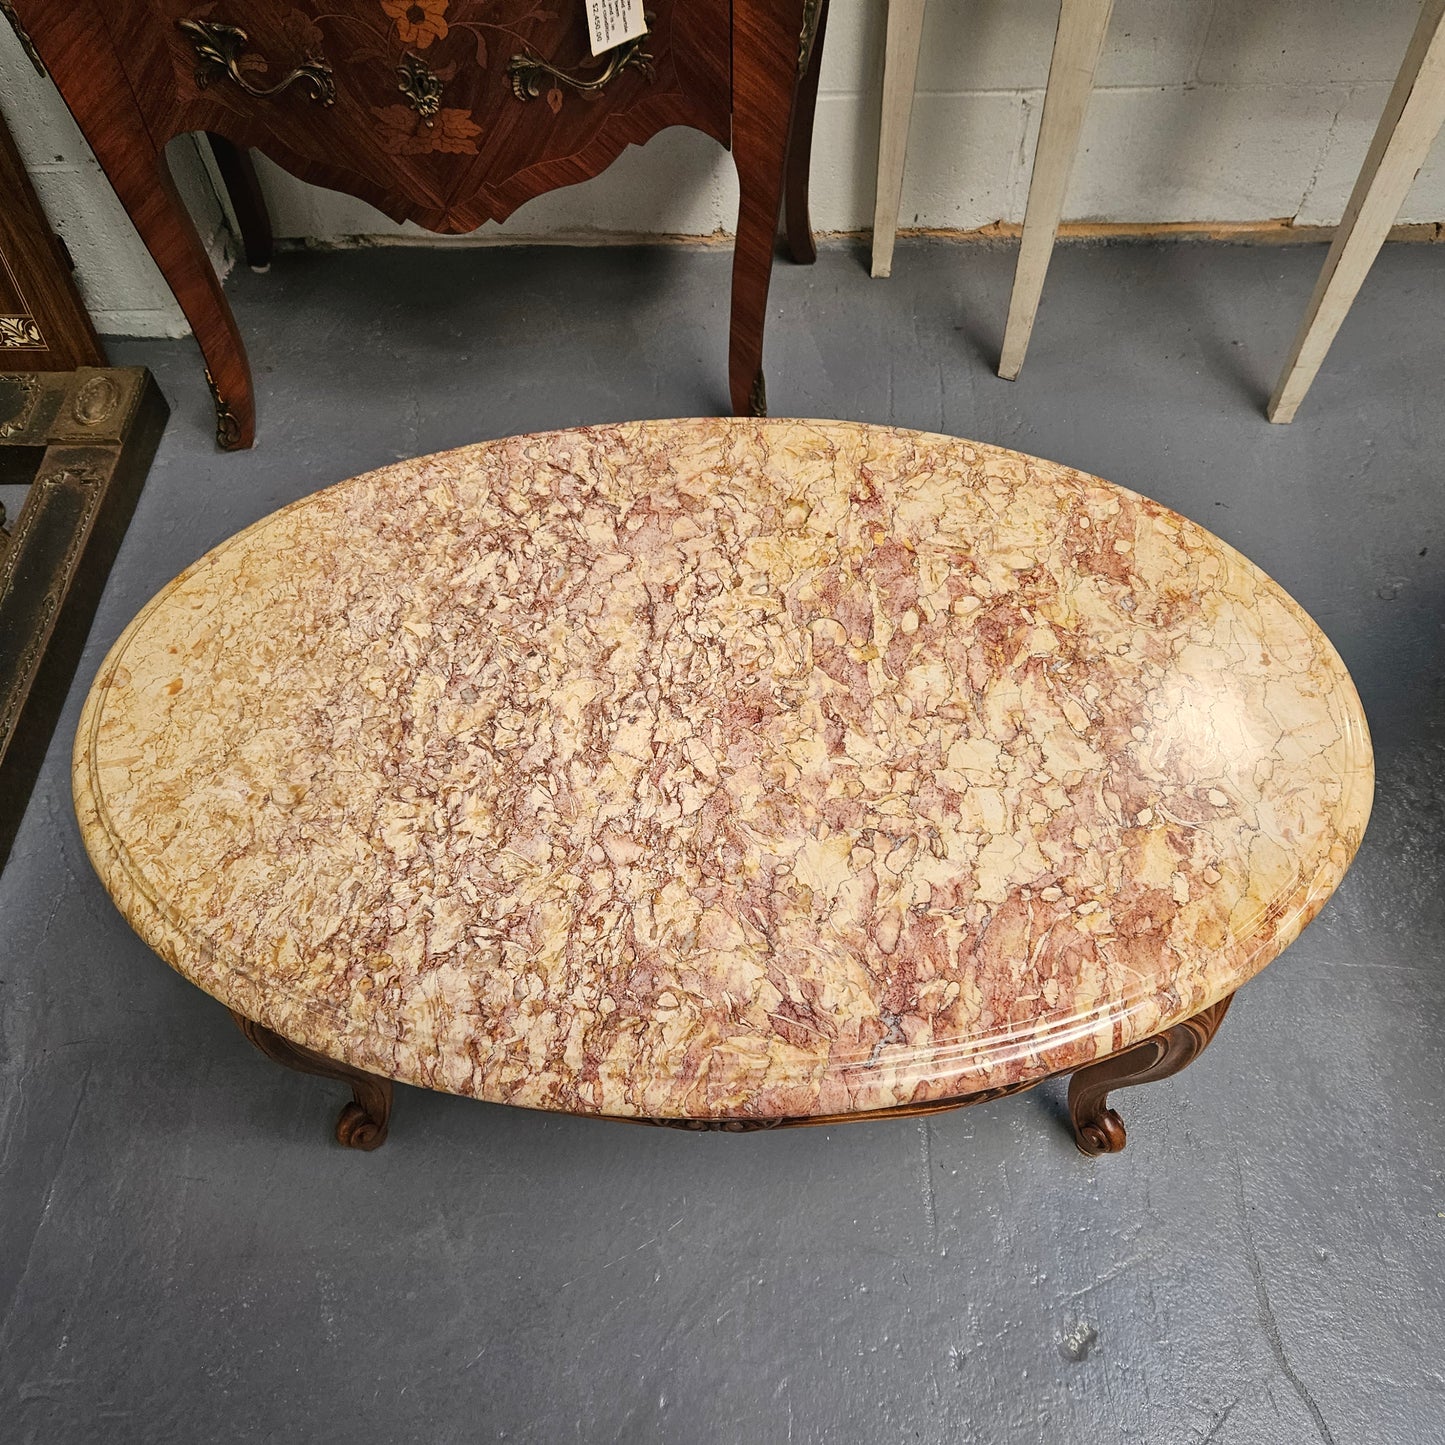 Lovely Louis XV style French fruitwood oval coffee table with a beautiful marble top. This piece is in great original condition and has been detailed to maintain its original condition.